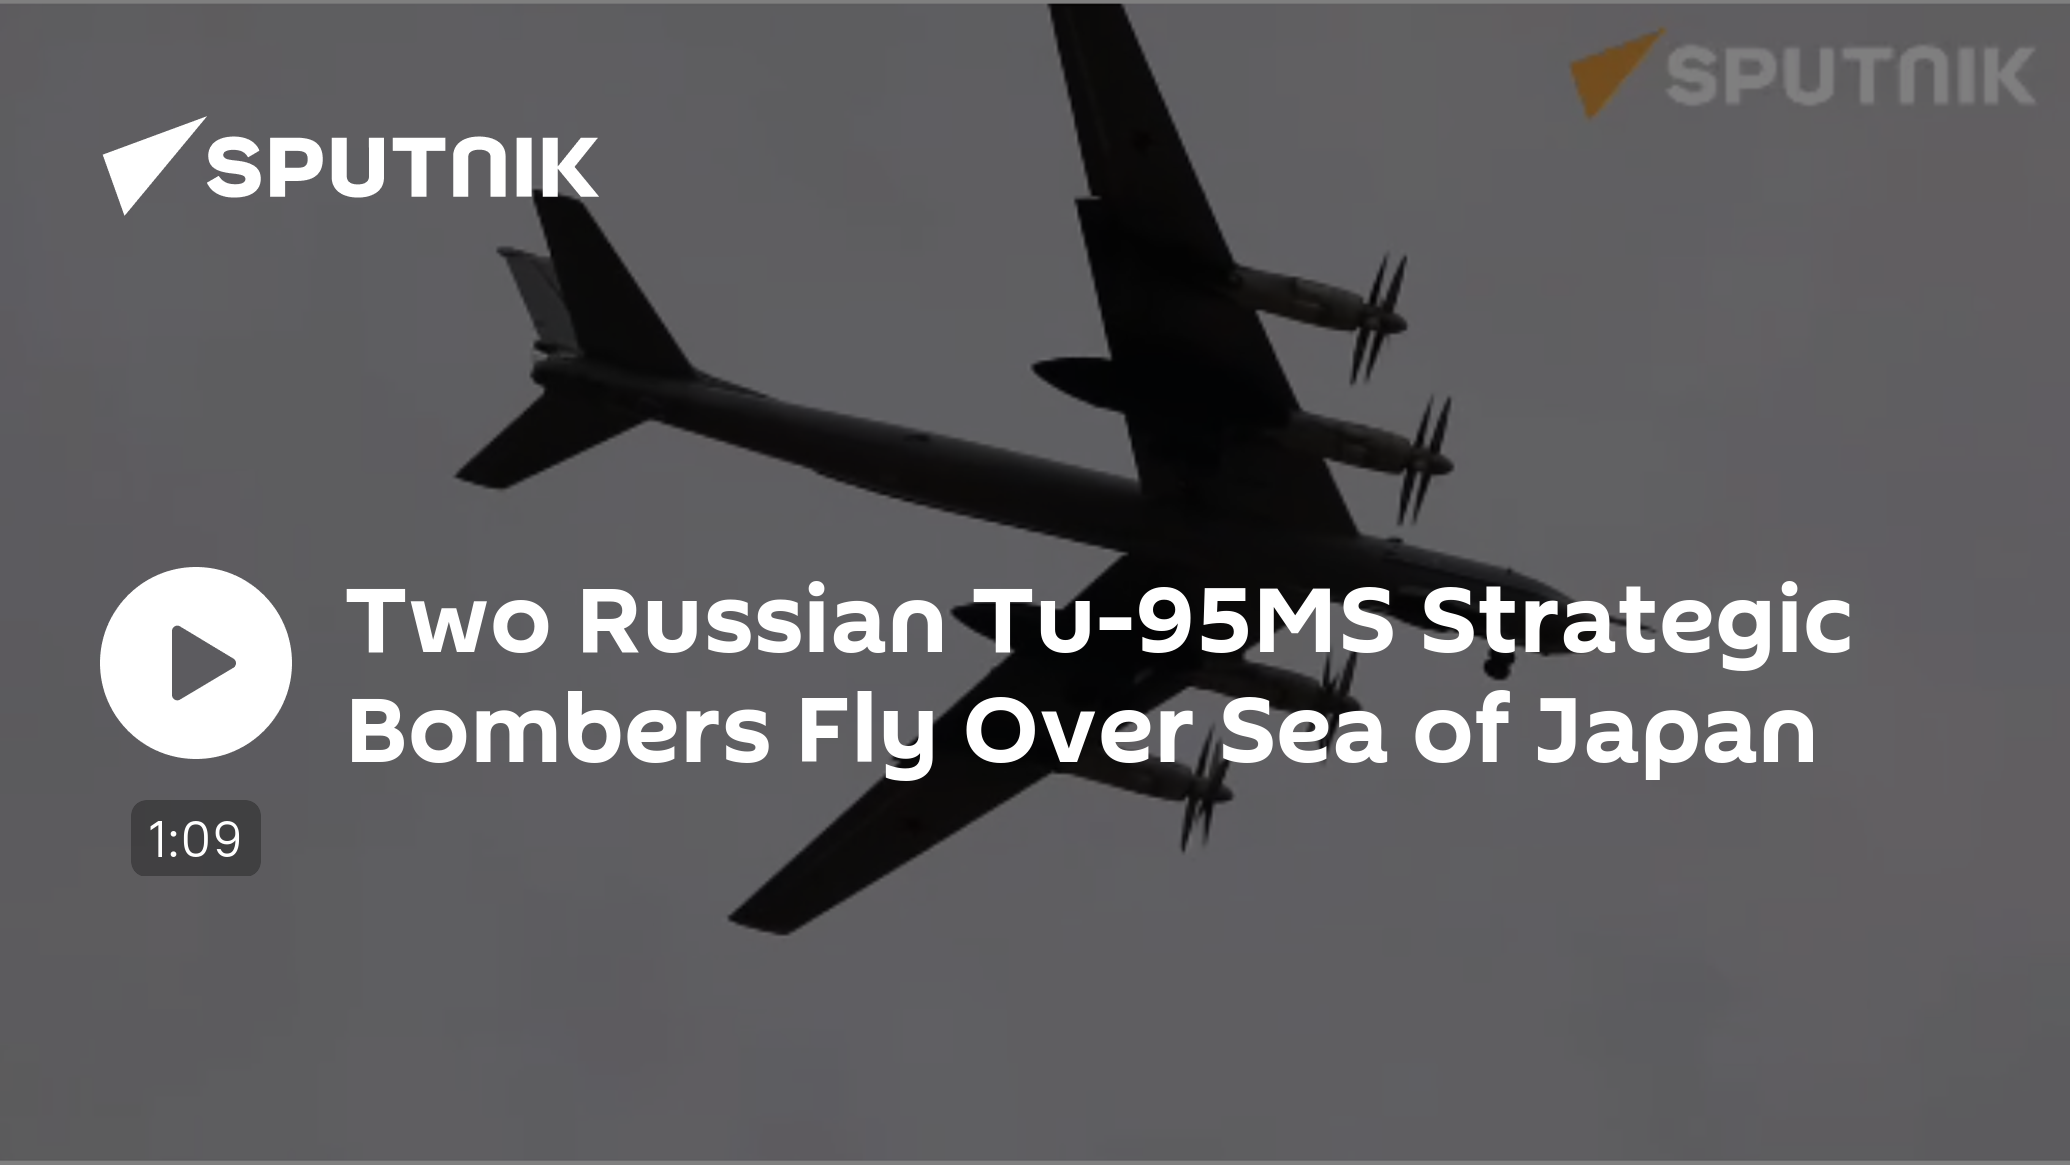 Two Russian Tu-95MS Strategic Bombers Fly Over Sea of Japan